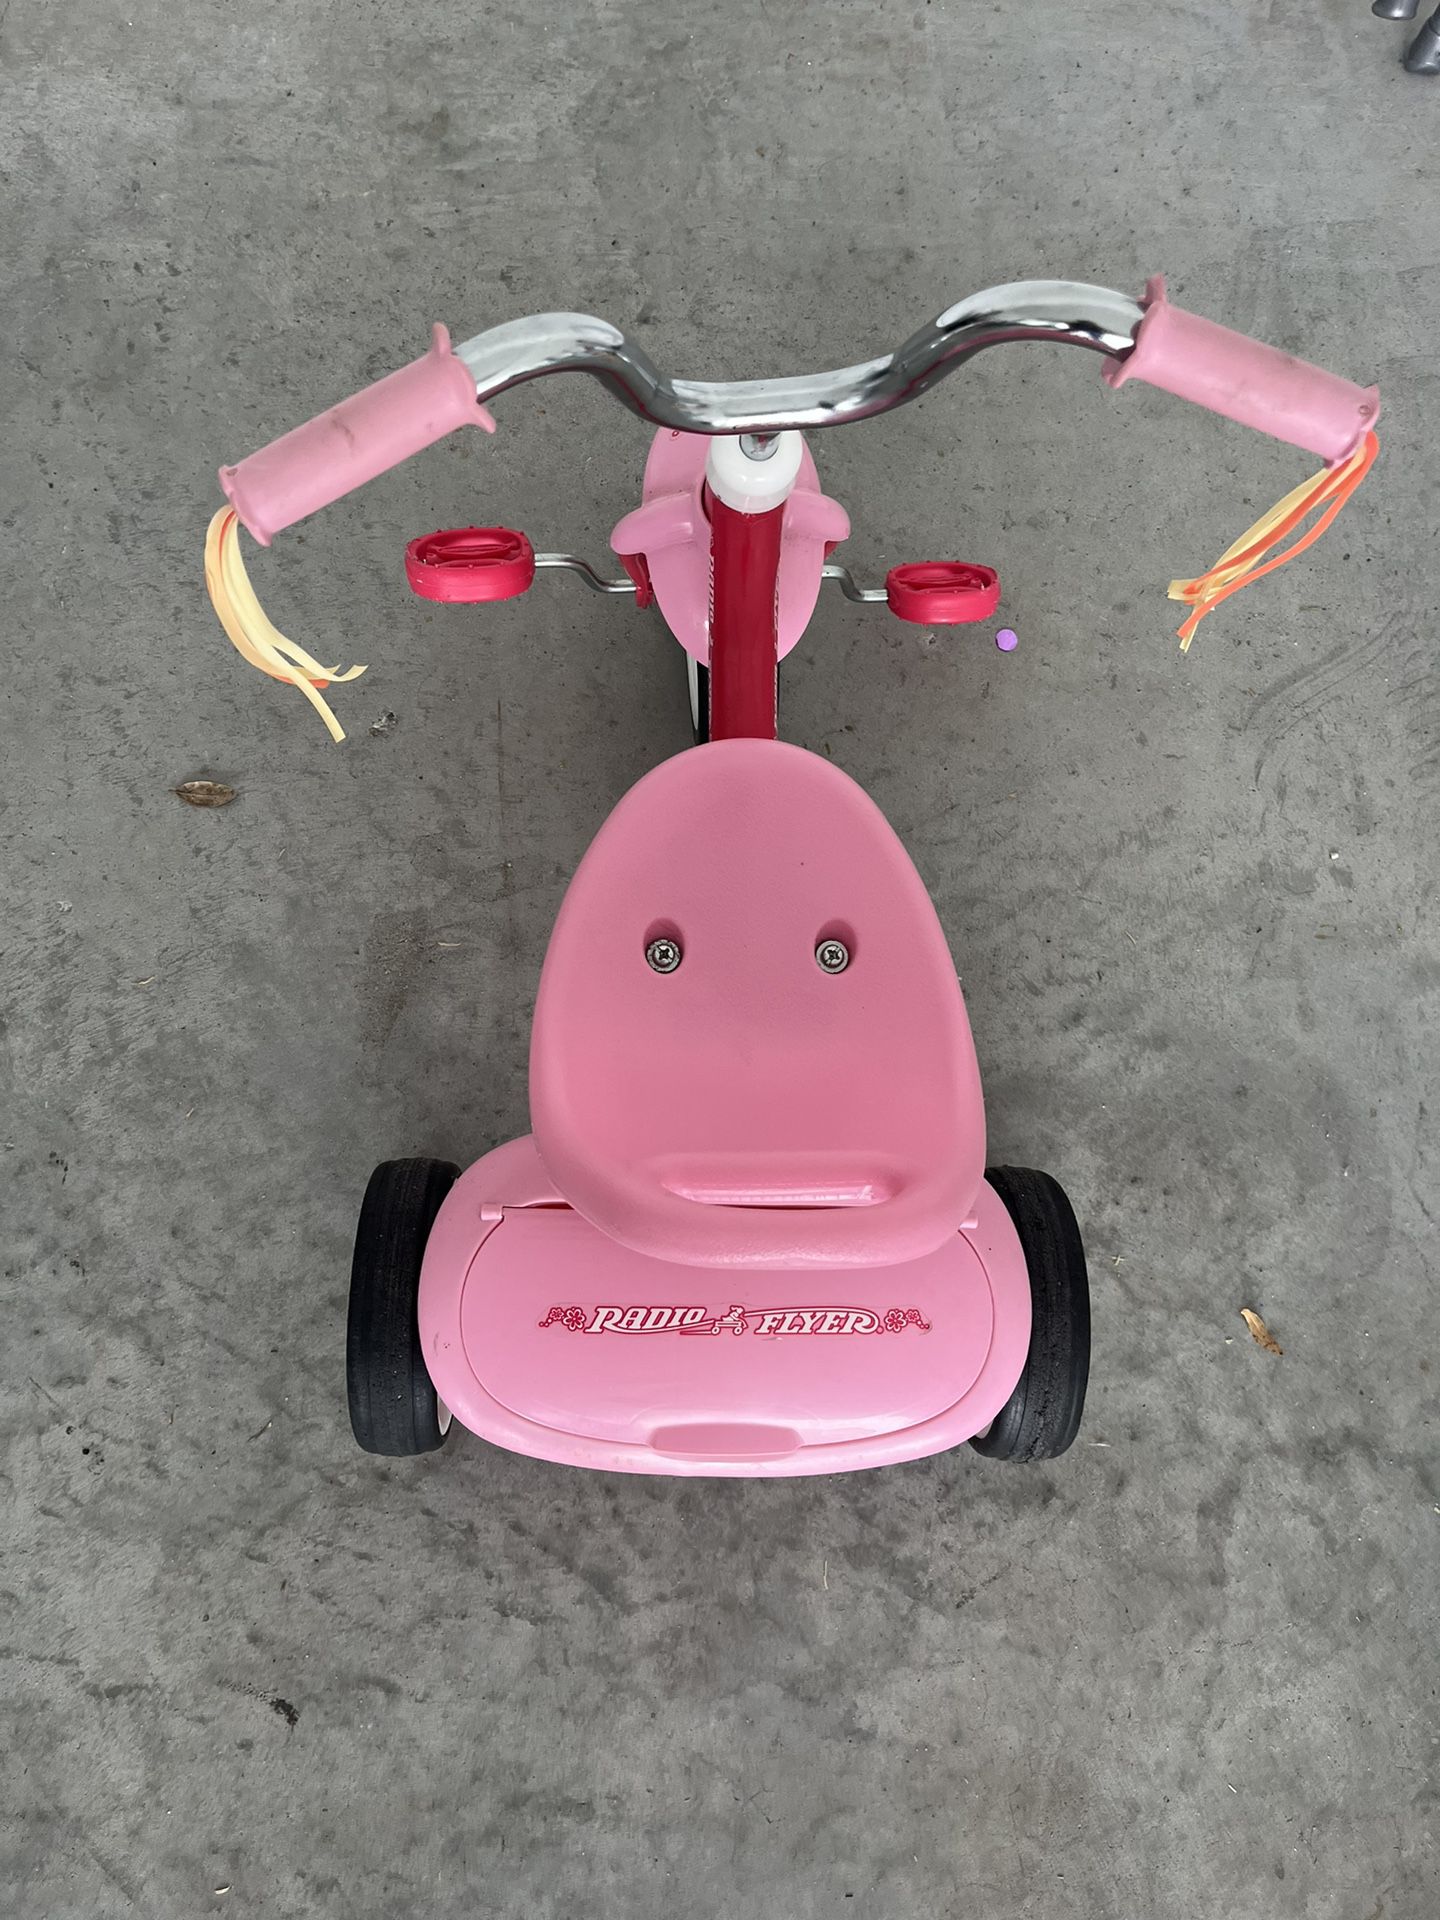 Pink Tricycle 